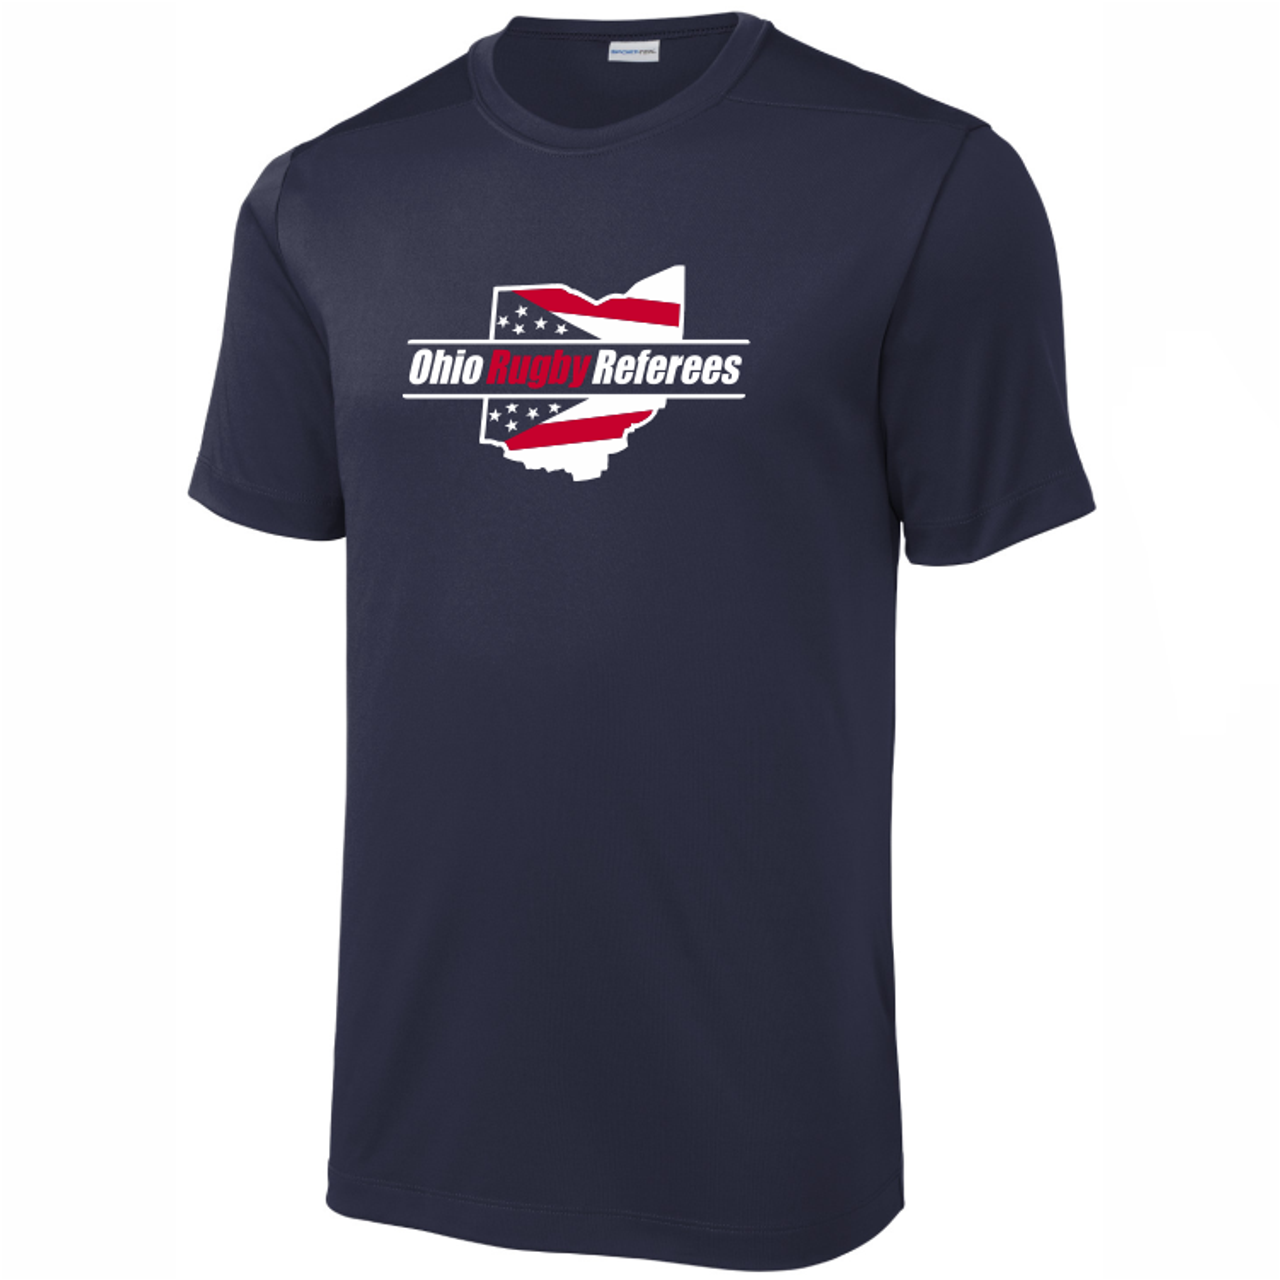  Ohio Rugby Referees Performance T-Shirt, Navy